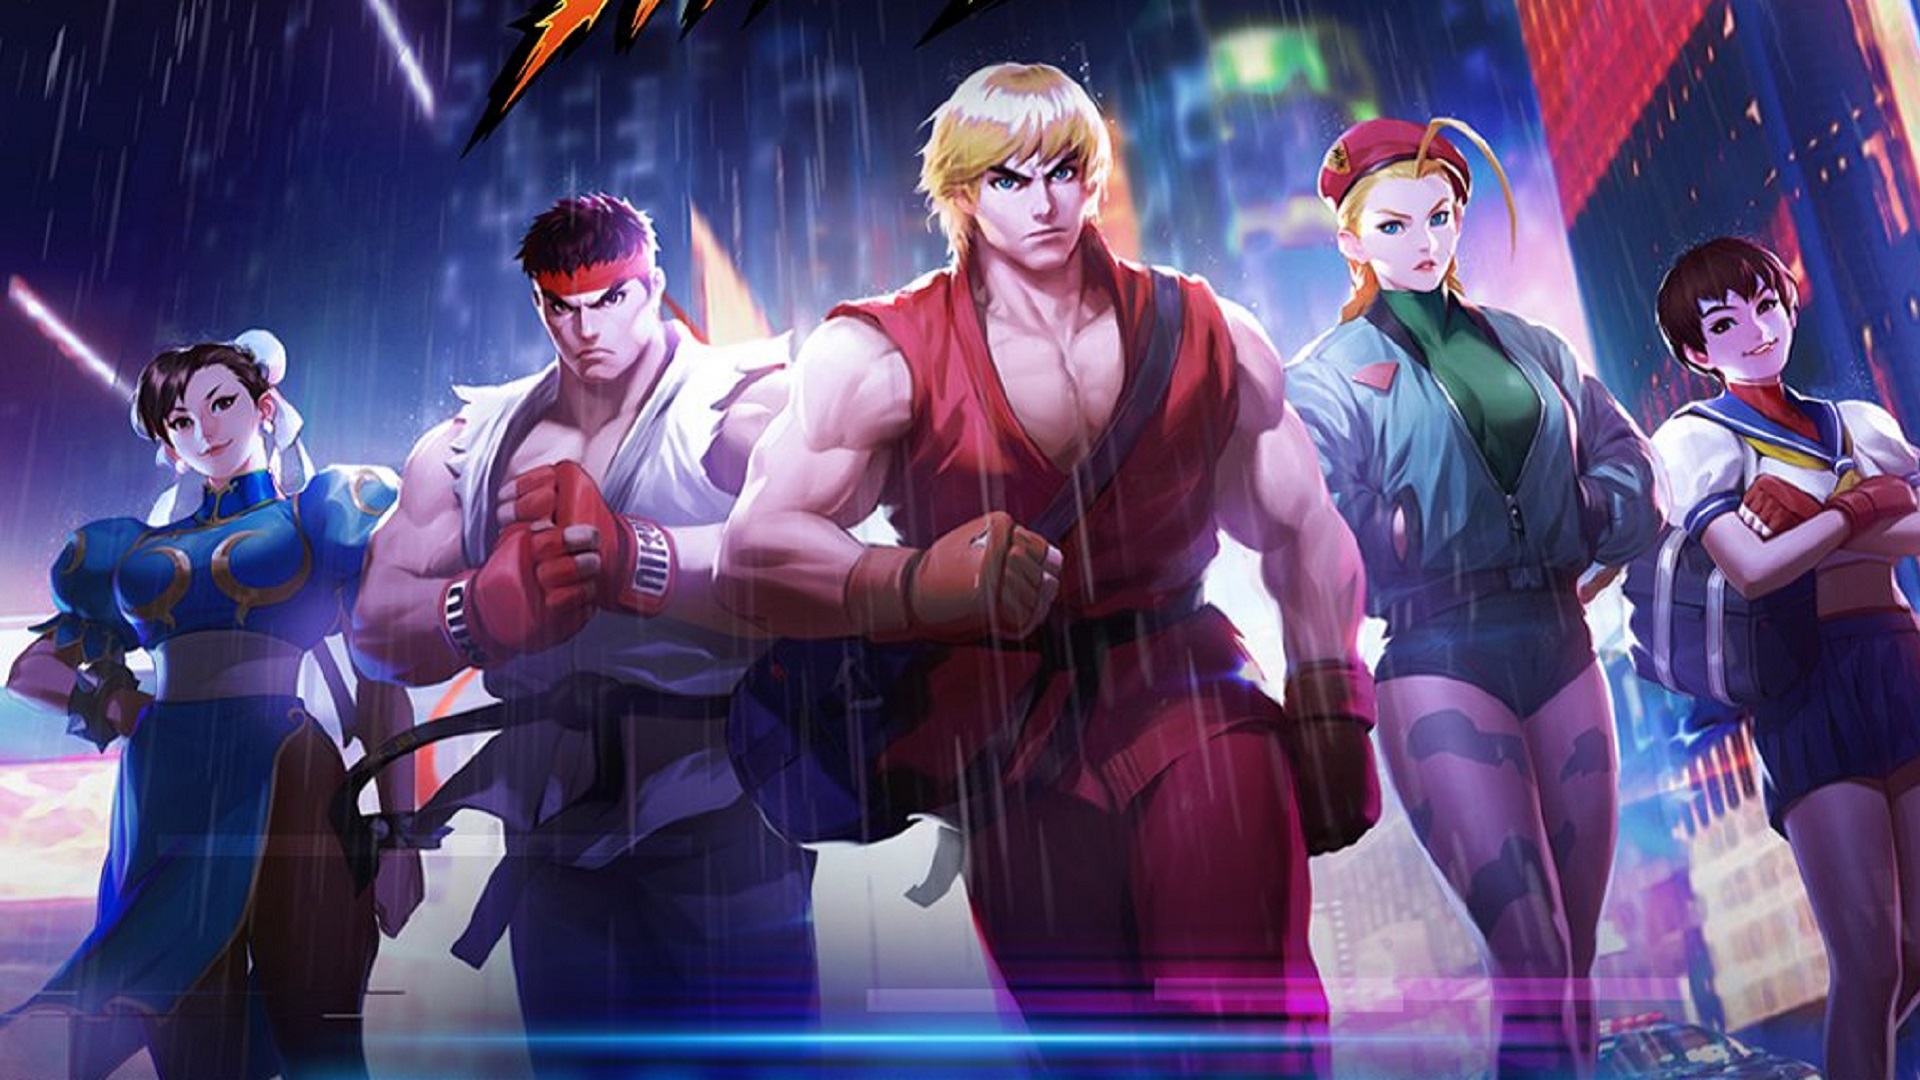 Street Fighter' film and TV rights acquired by Legendary